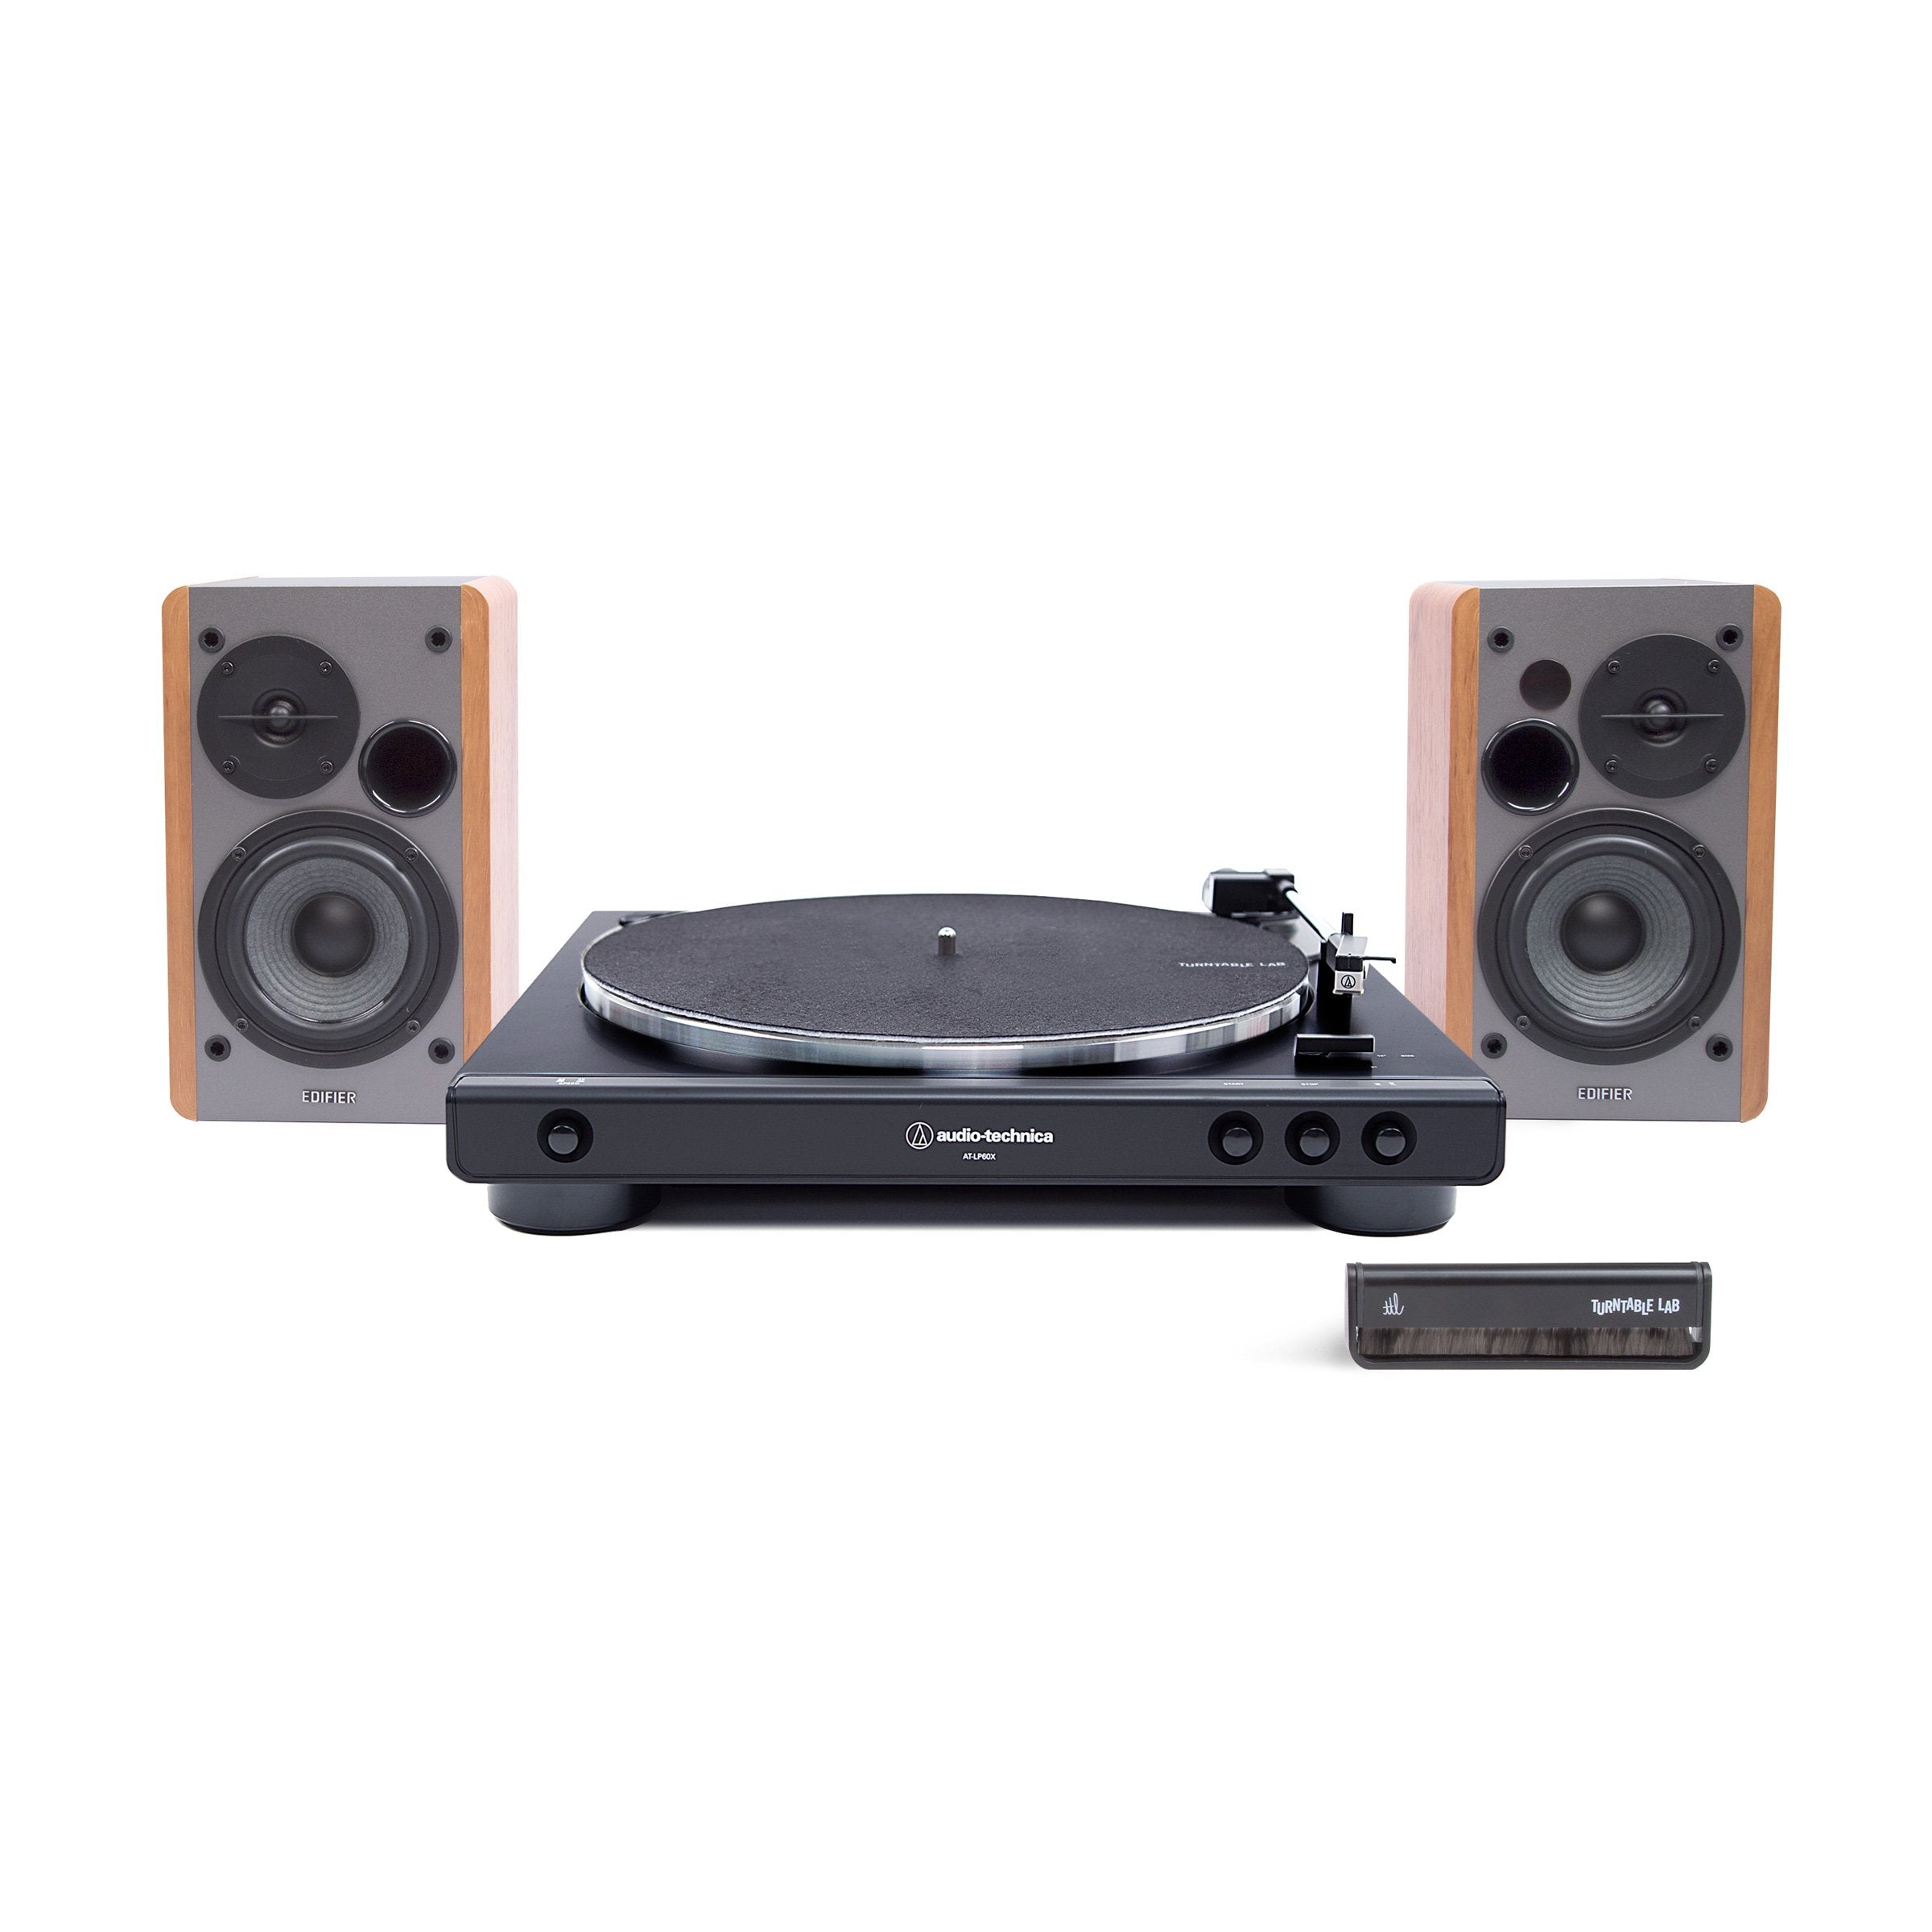 Audio-Technica: AT-LP60XUSB / Edifier R1280DB / Turntable Package